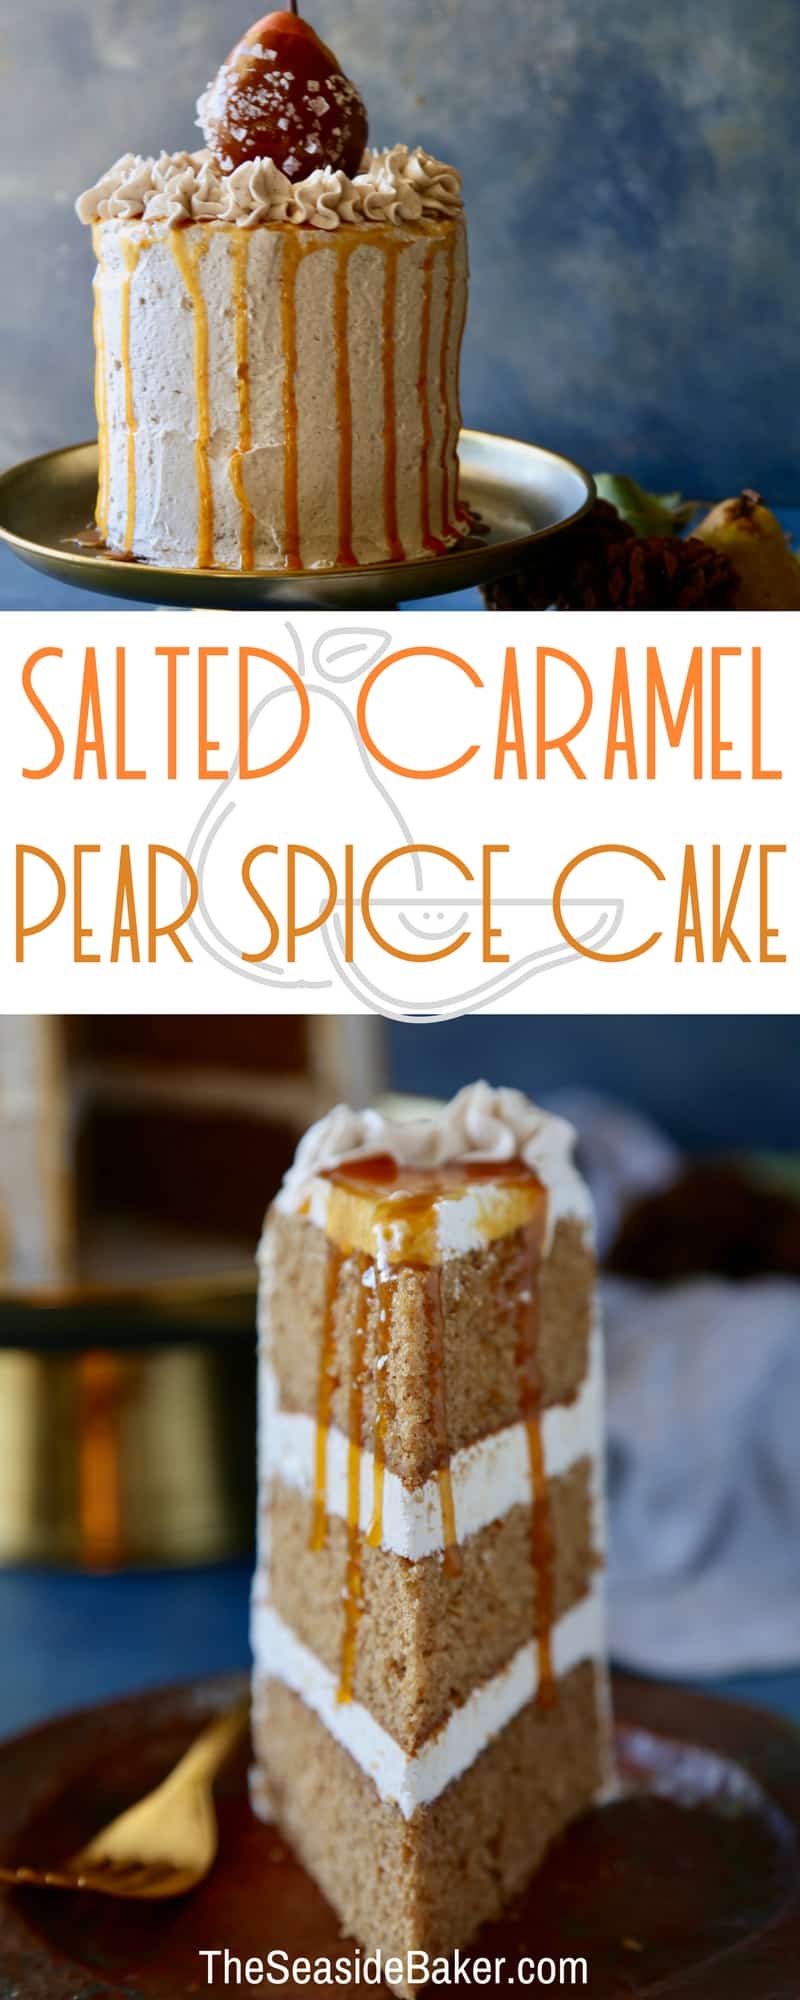 Pear Studded Spice Cake layers, topped with cinnamon buttercream, pear filling and more salted caramel